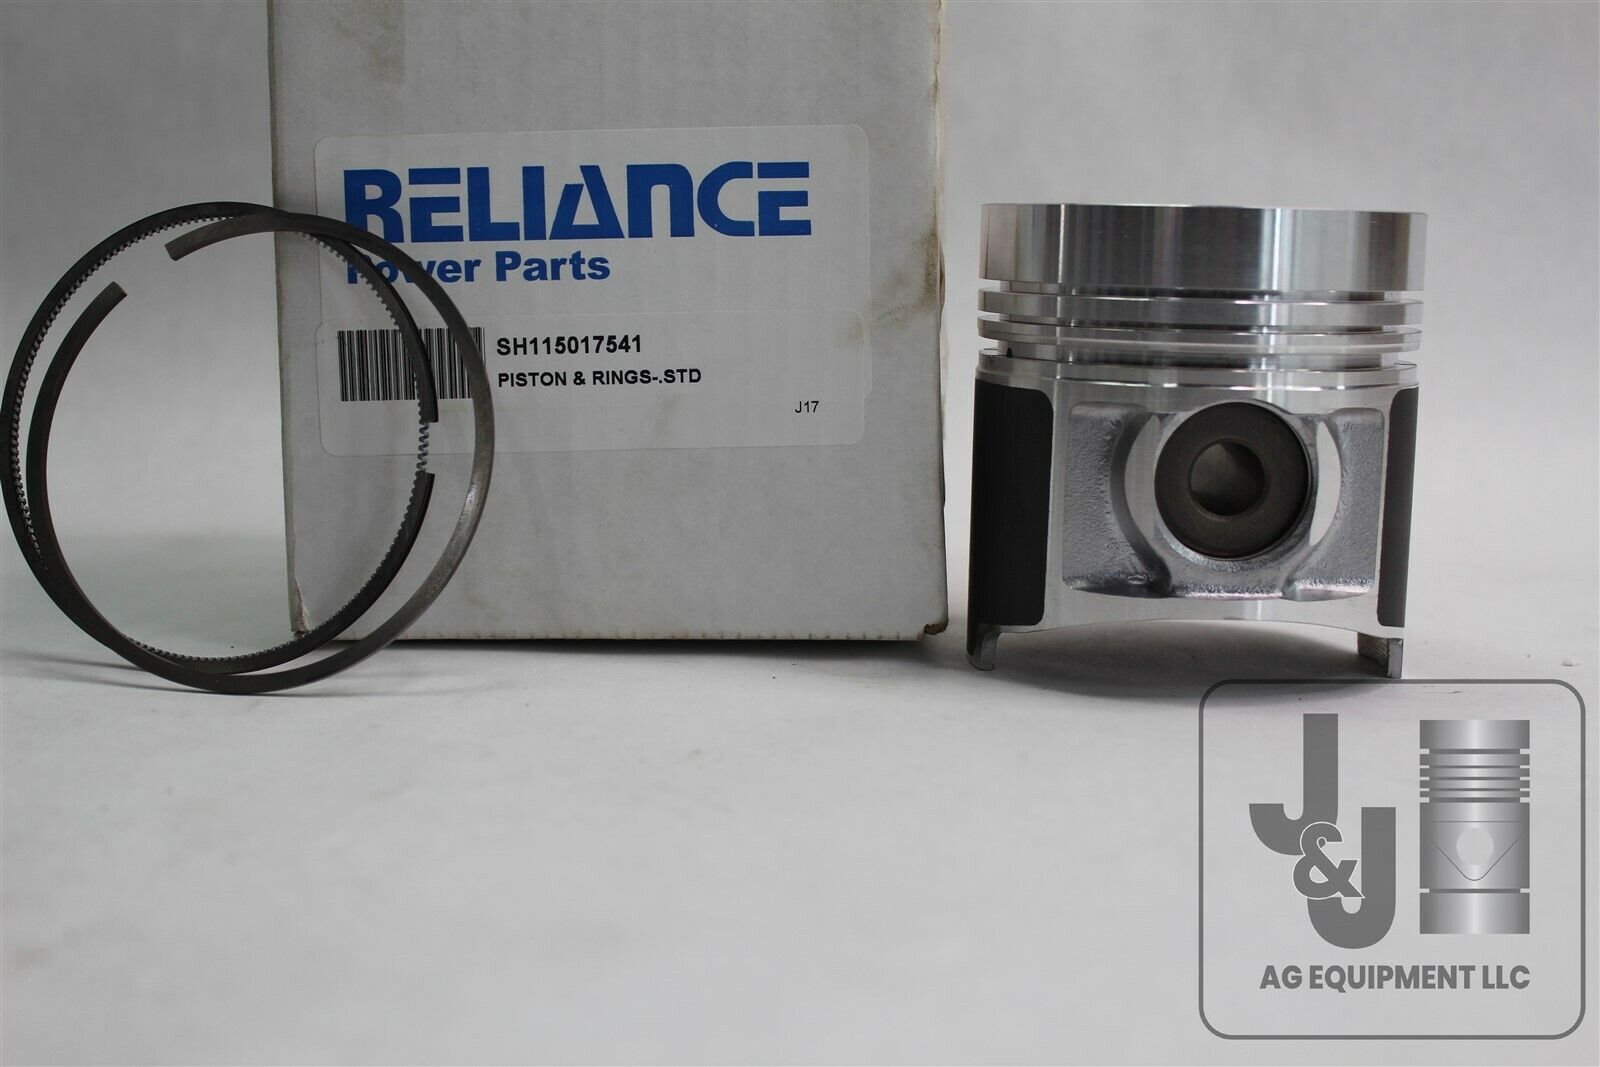 RELIANCE SH115017541 PISTON AND RINGS STD FITS FORD CATERPILLAR SHIBAURA